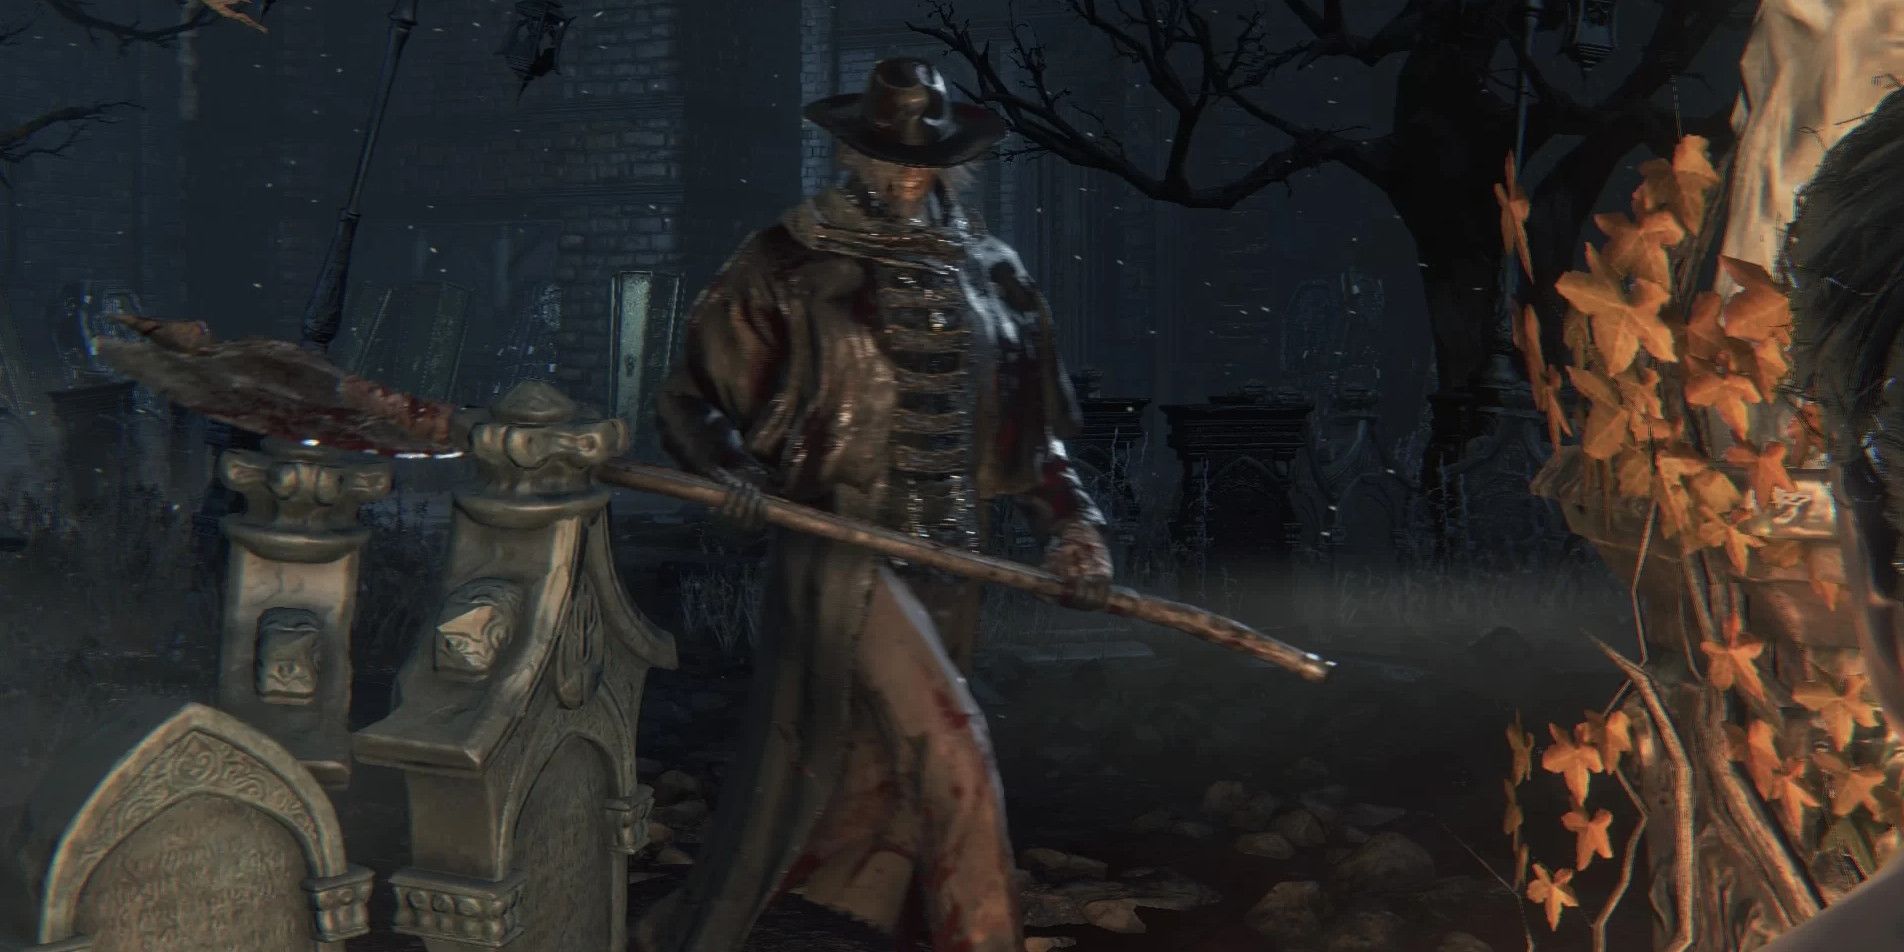 father gascoigne in a graveyard with a long axe